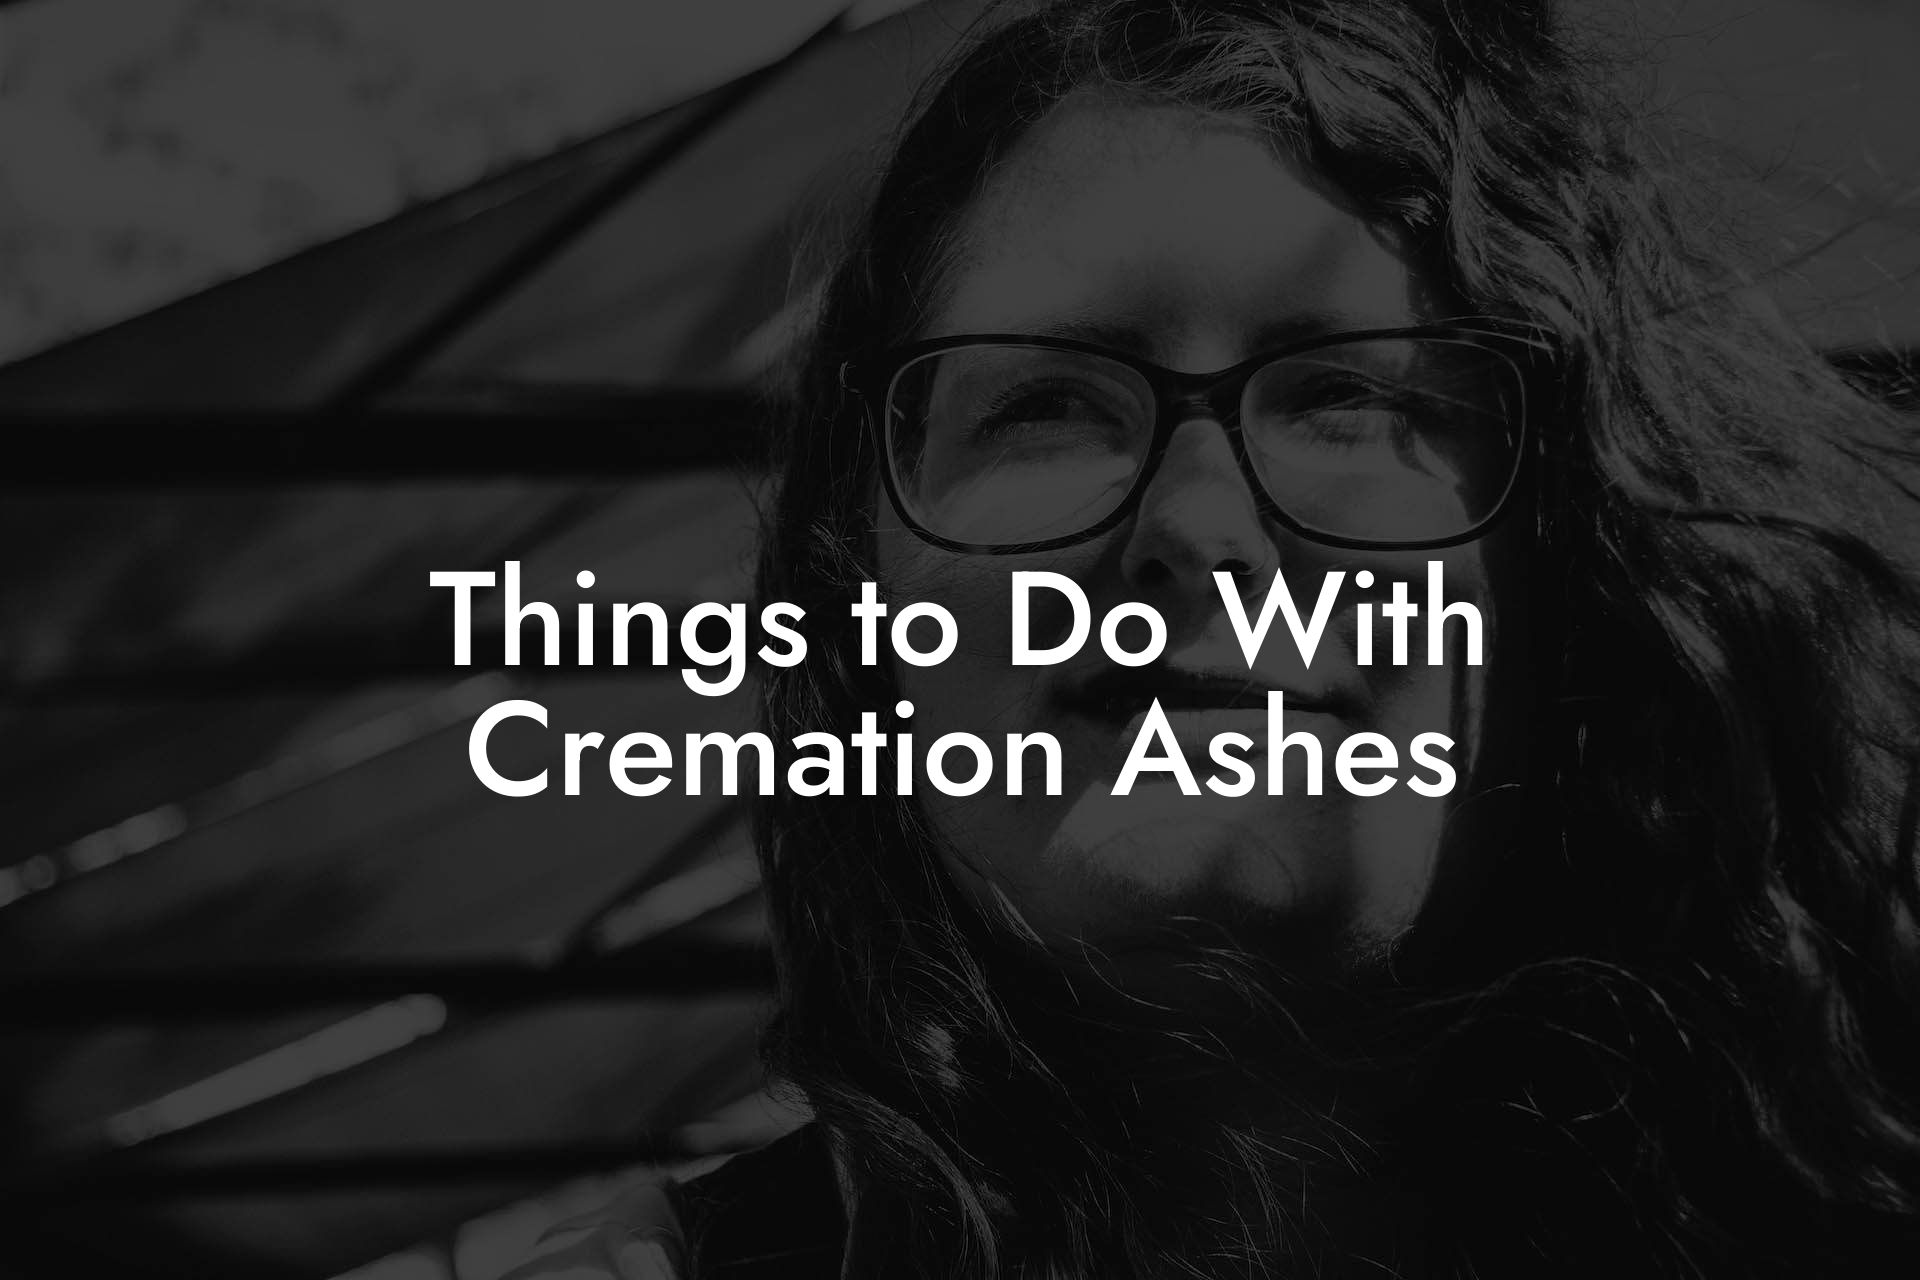 Things to Do With Cremation Ashes